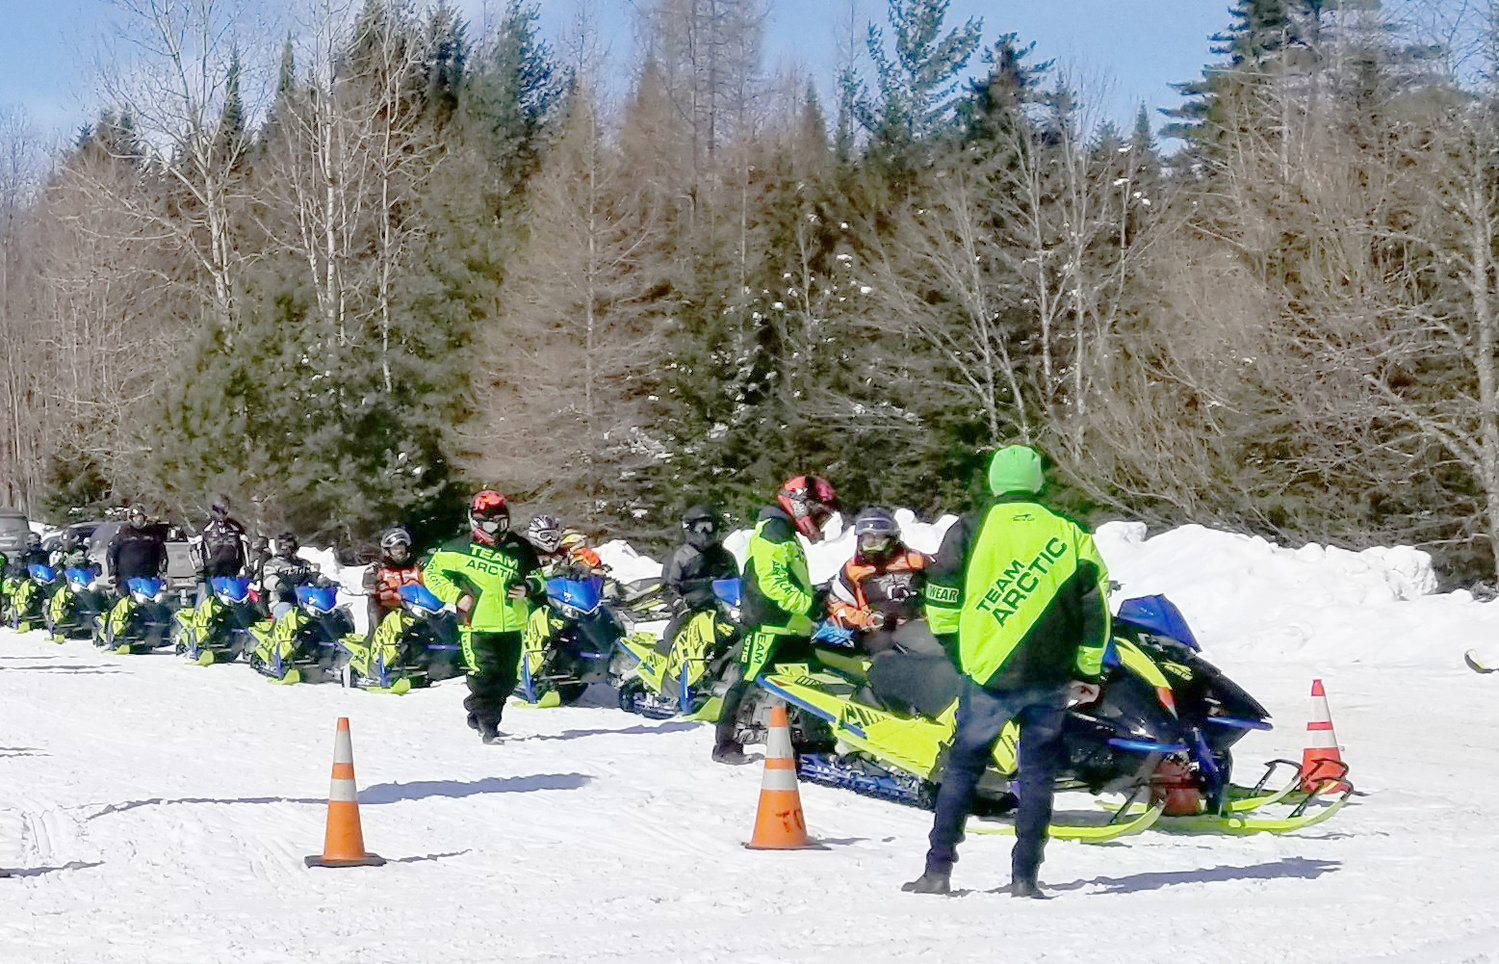 SnoFest demo rides at the 2019 SnoFest. This year’s event will take place Friday and Saturday, March 10-11 at the George T. Hiltebrant Recreation Center in Old Forge.